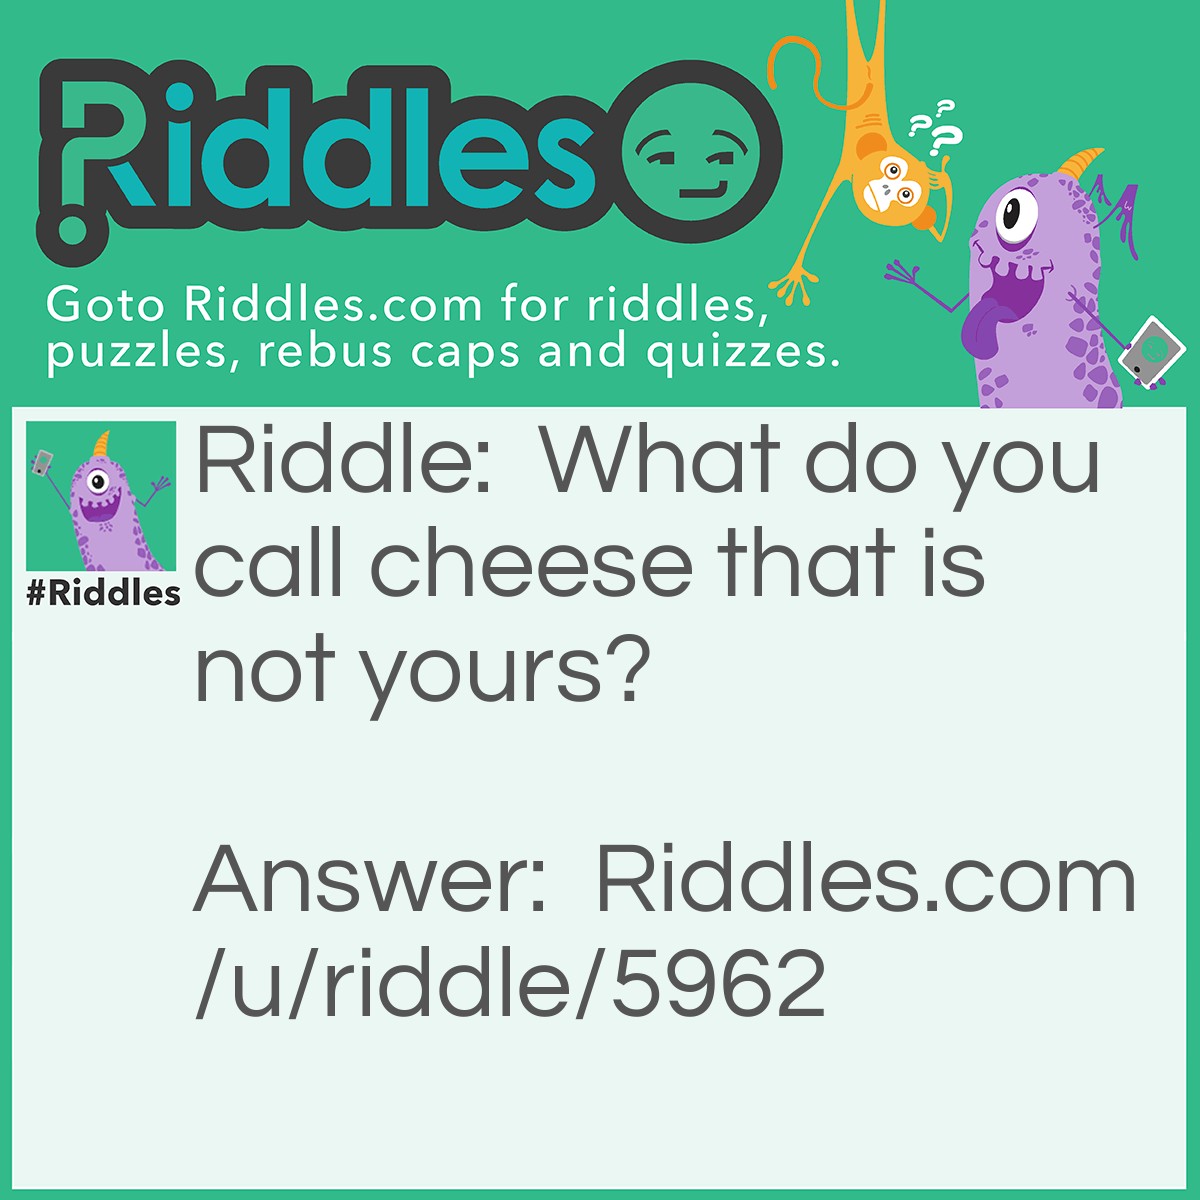 Riddle: What do you call cheese that is not yours? Answer: Nacho cheese.